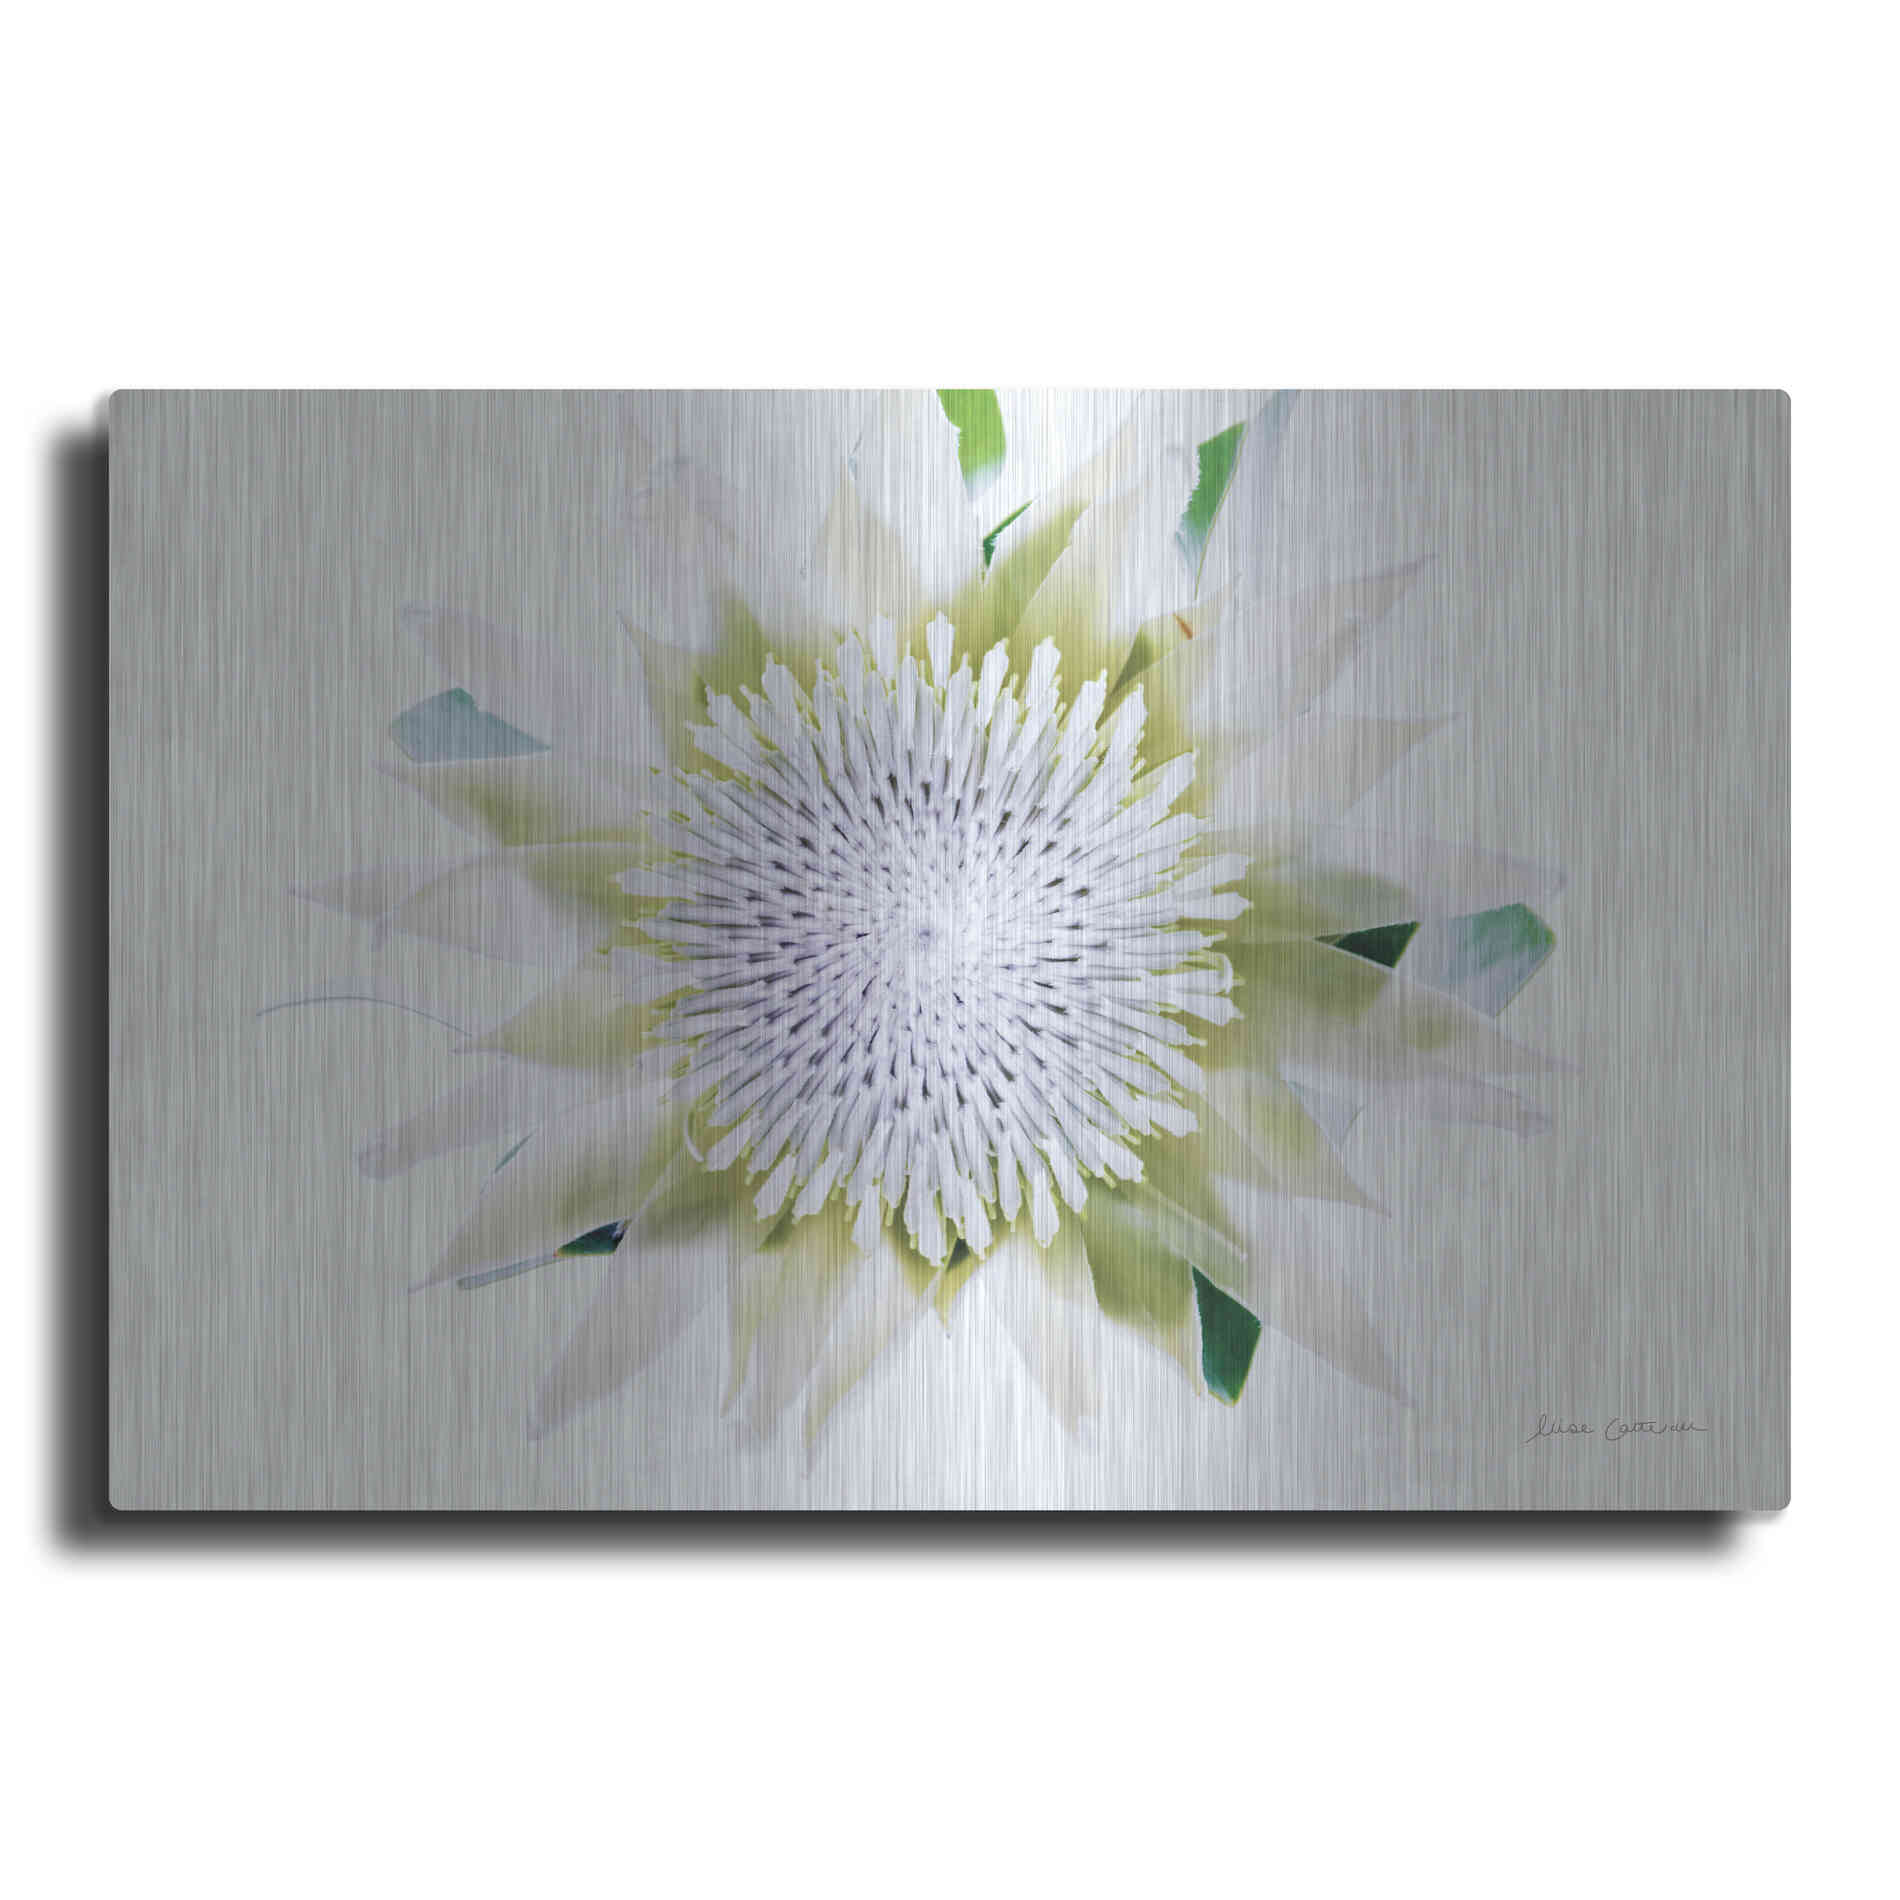 Luxe Metal Art 'Protea Center I' by Elise Catterall, Metal Wall Art